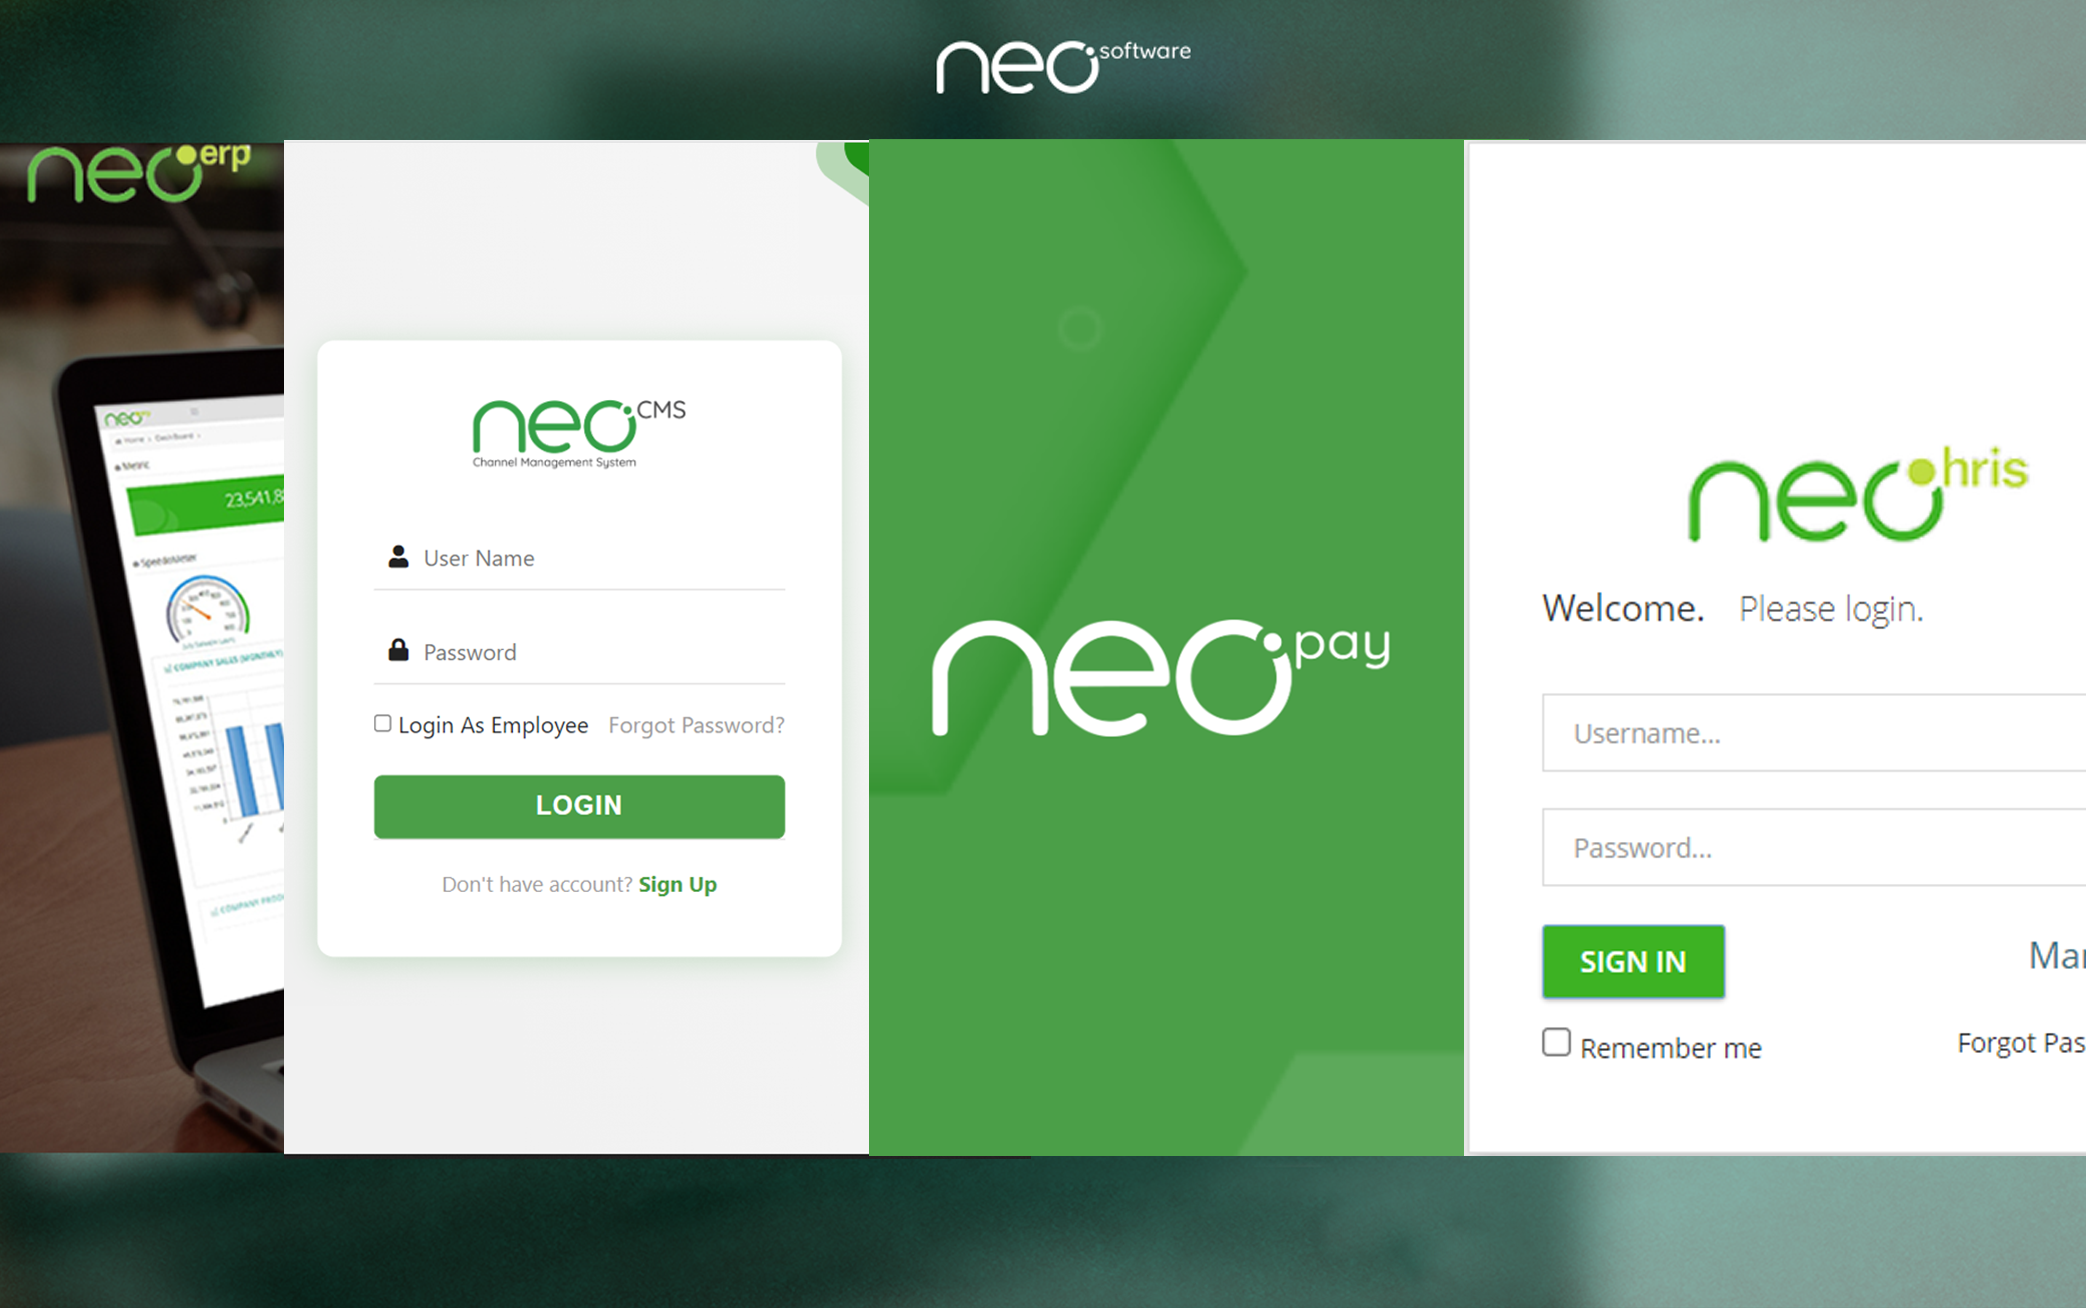 Neosoftware products login page